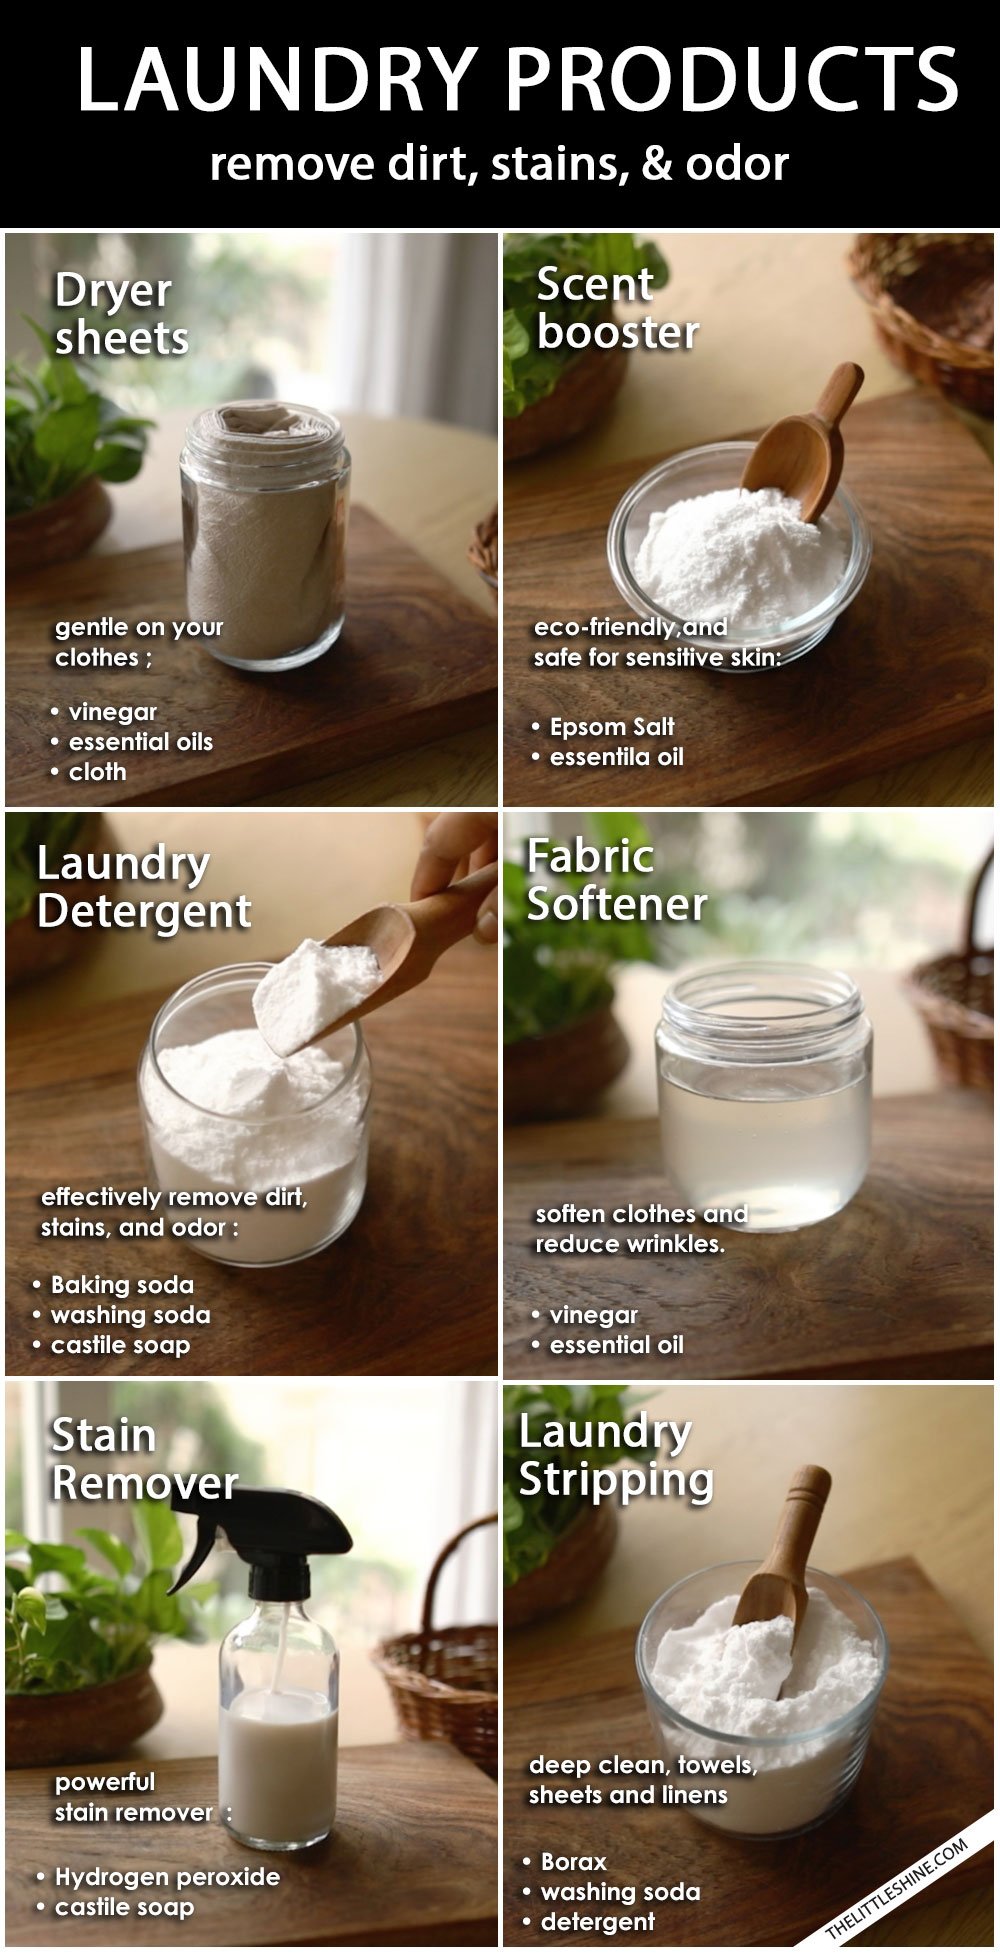 Make Natural Laundry Products at home to remove dirt, stains, and odor effectively